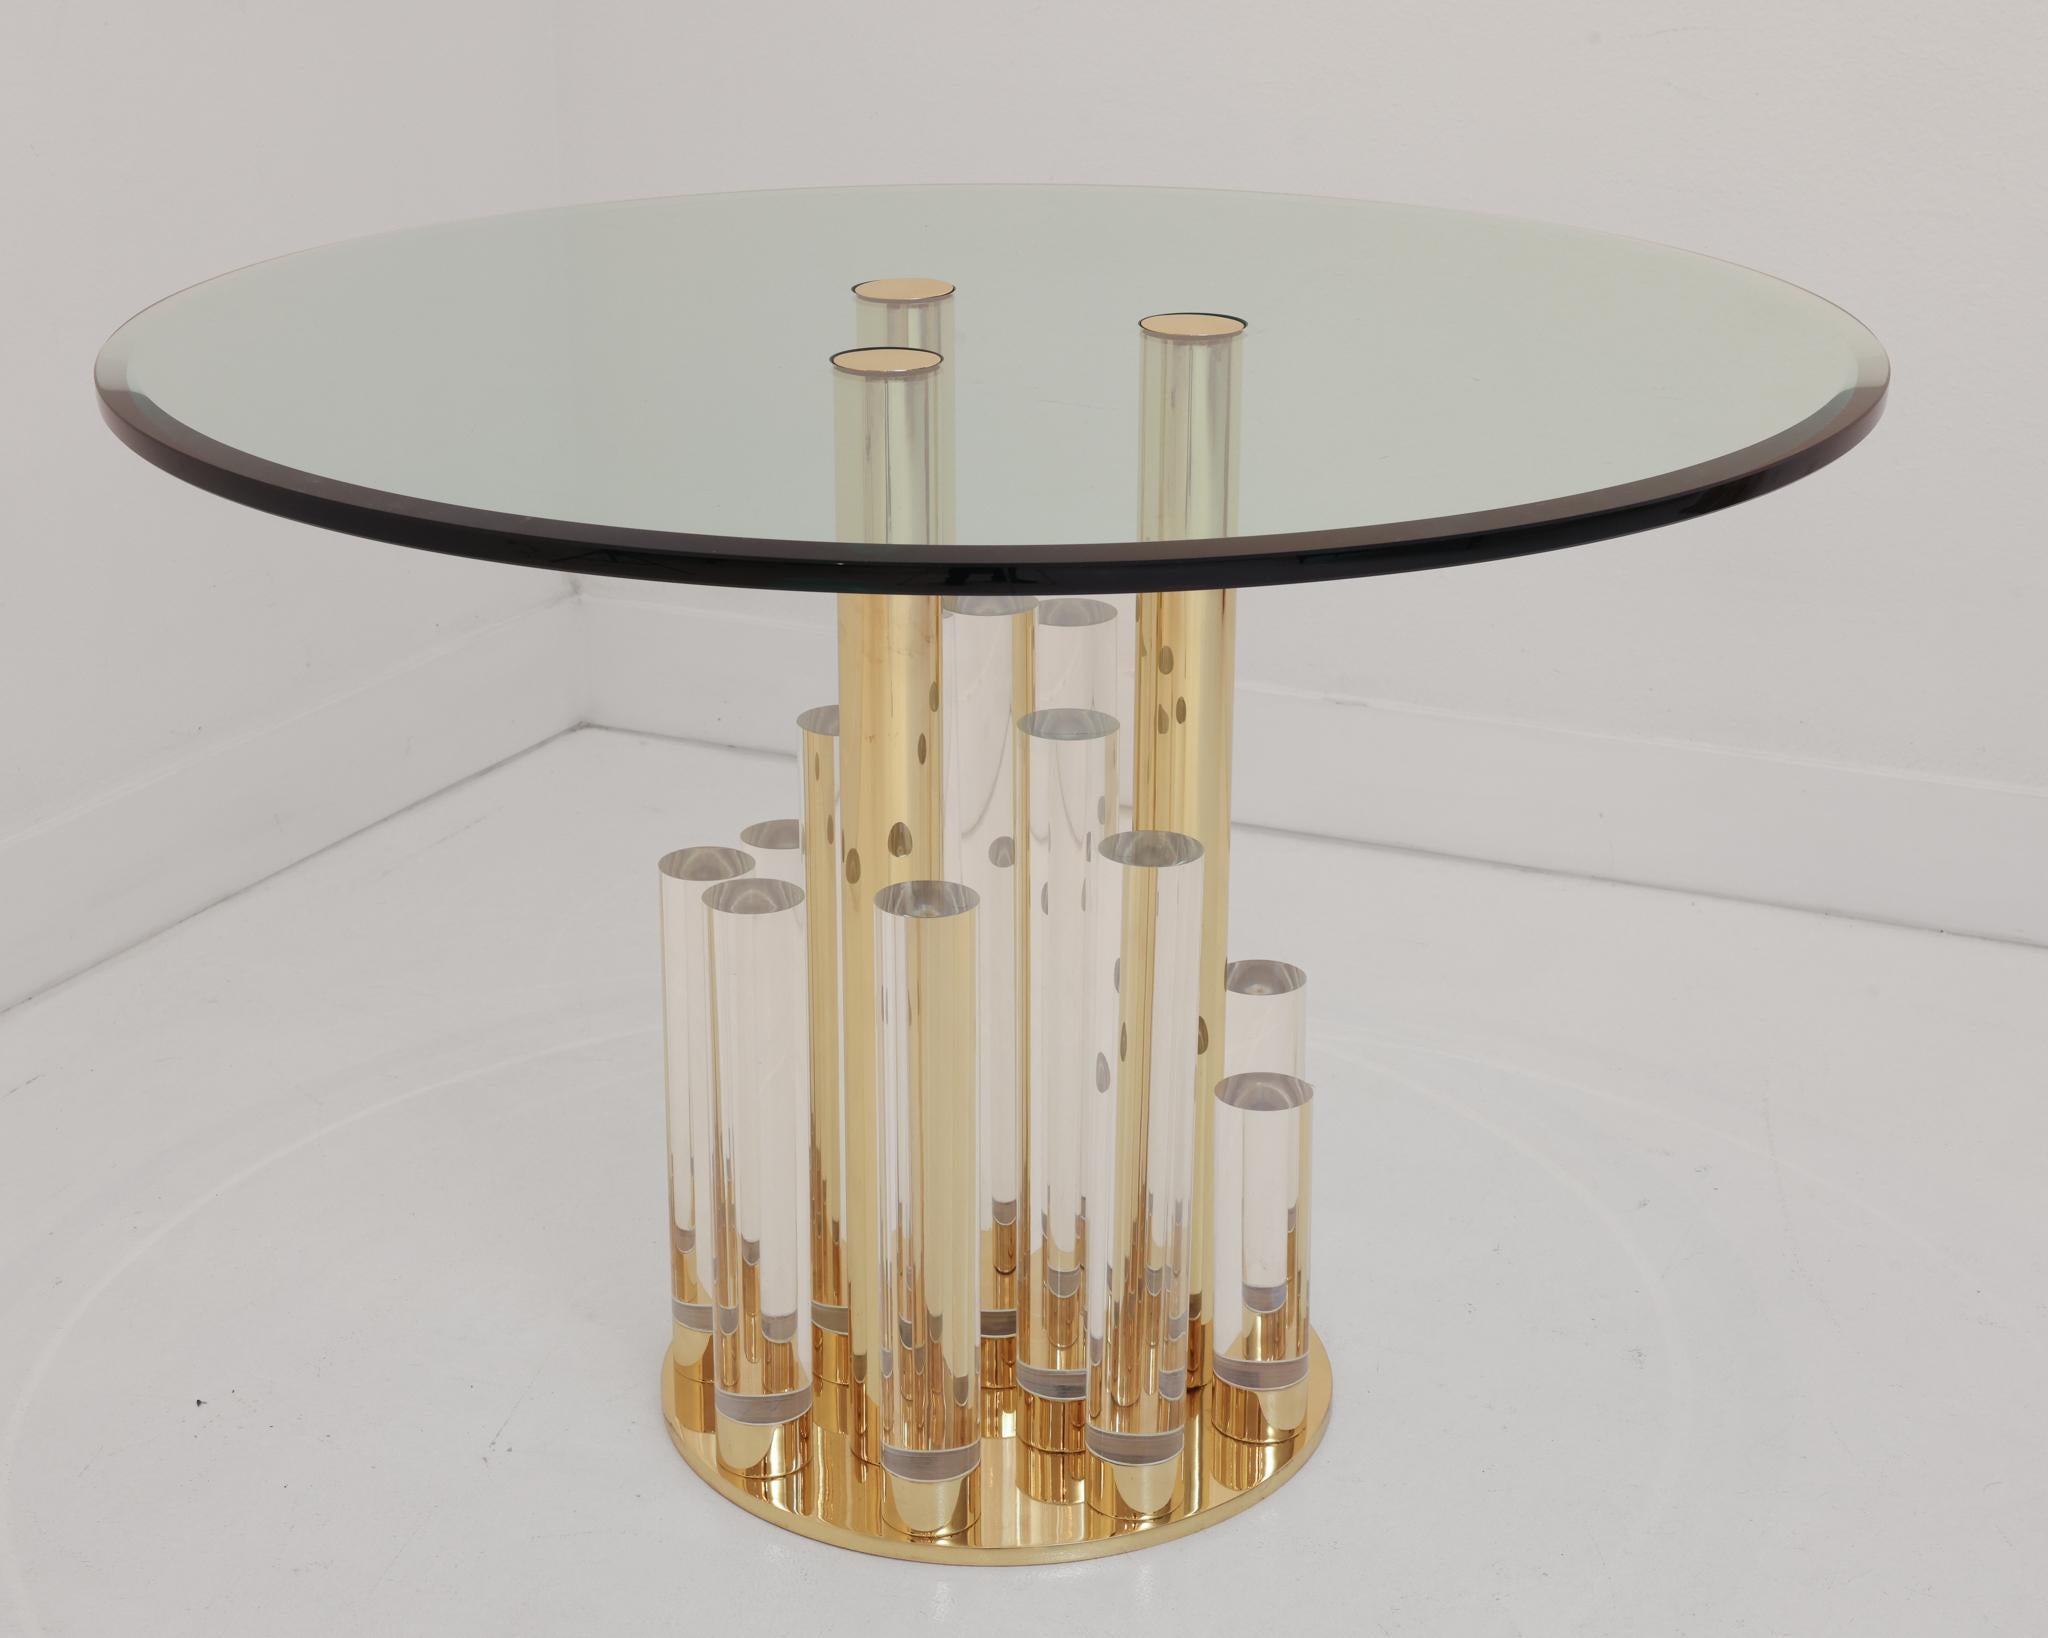 Plated Skyscraper Center Table Designed by Charles Hollis Jones